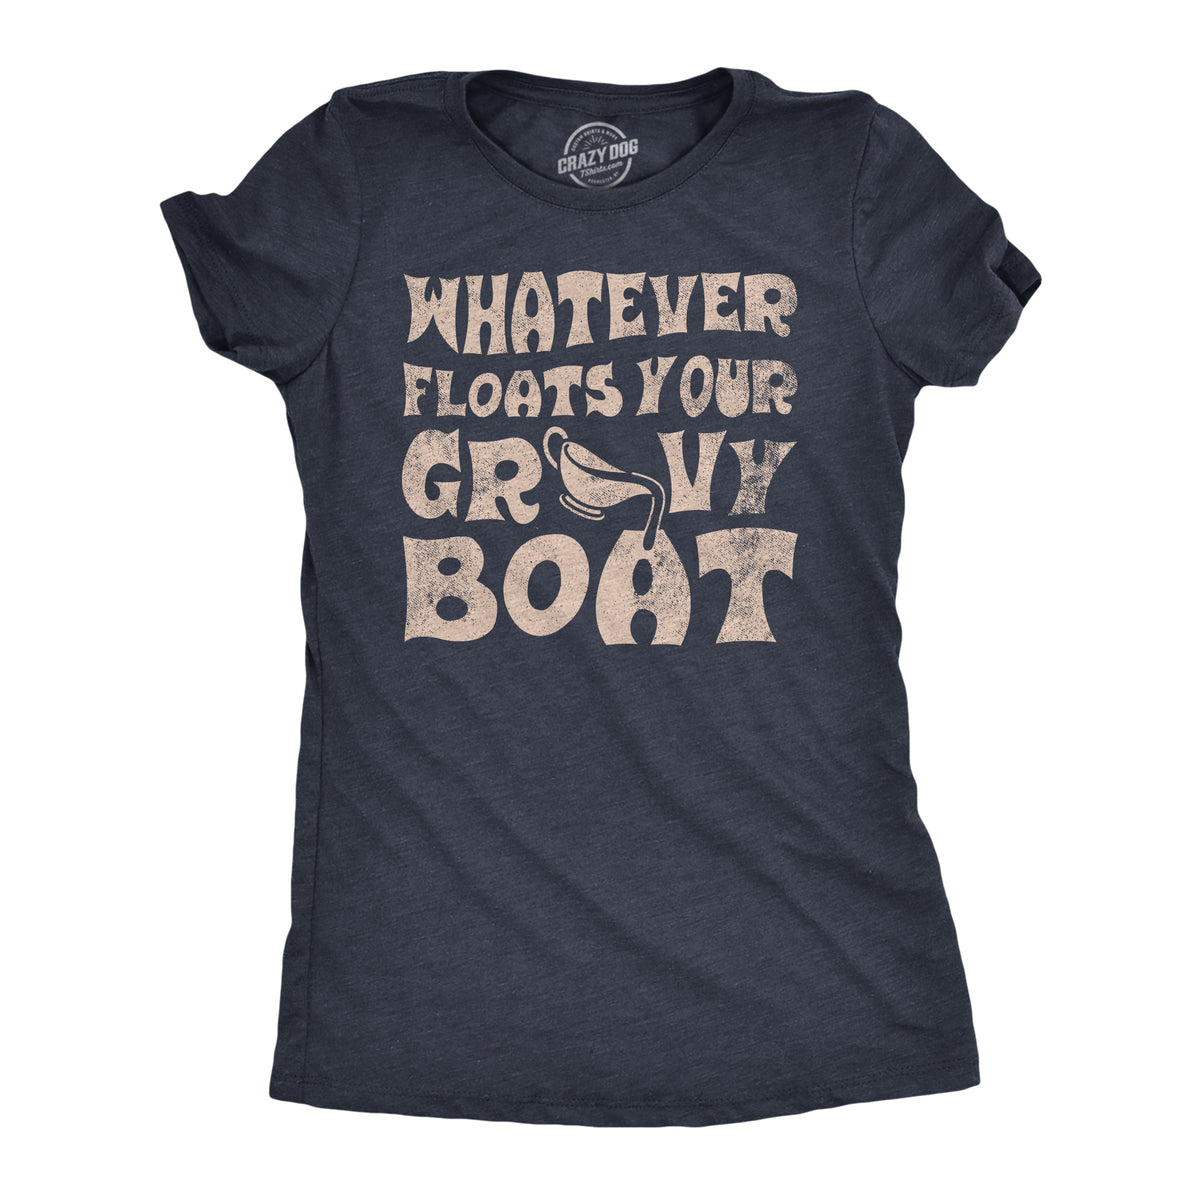 Funny Heather Navy - GRAVYBOAT Whatever Floats Your Gravy Boat Womens T Shirt Nerdy Thanksgiving Food sarcastic Tee